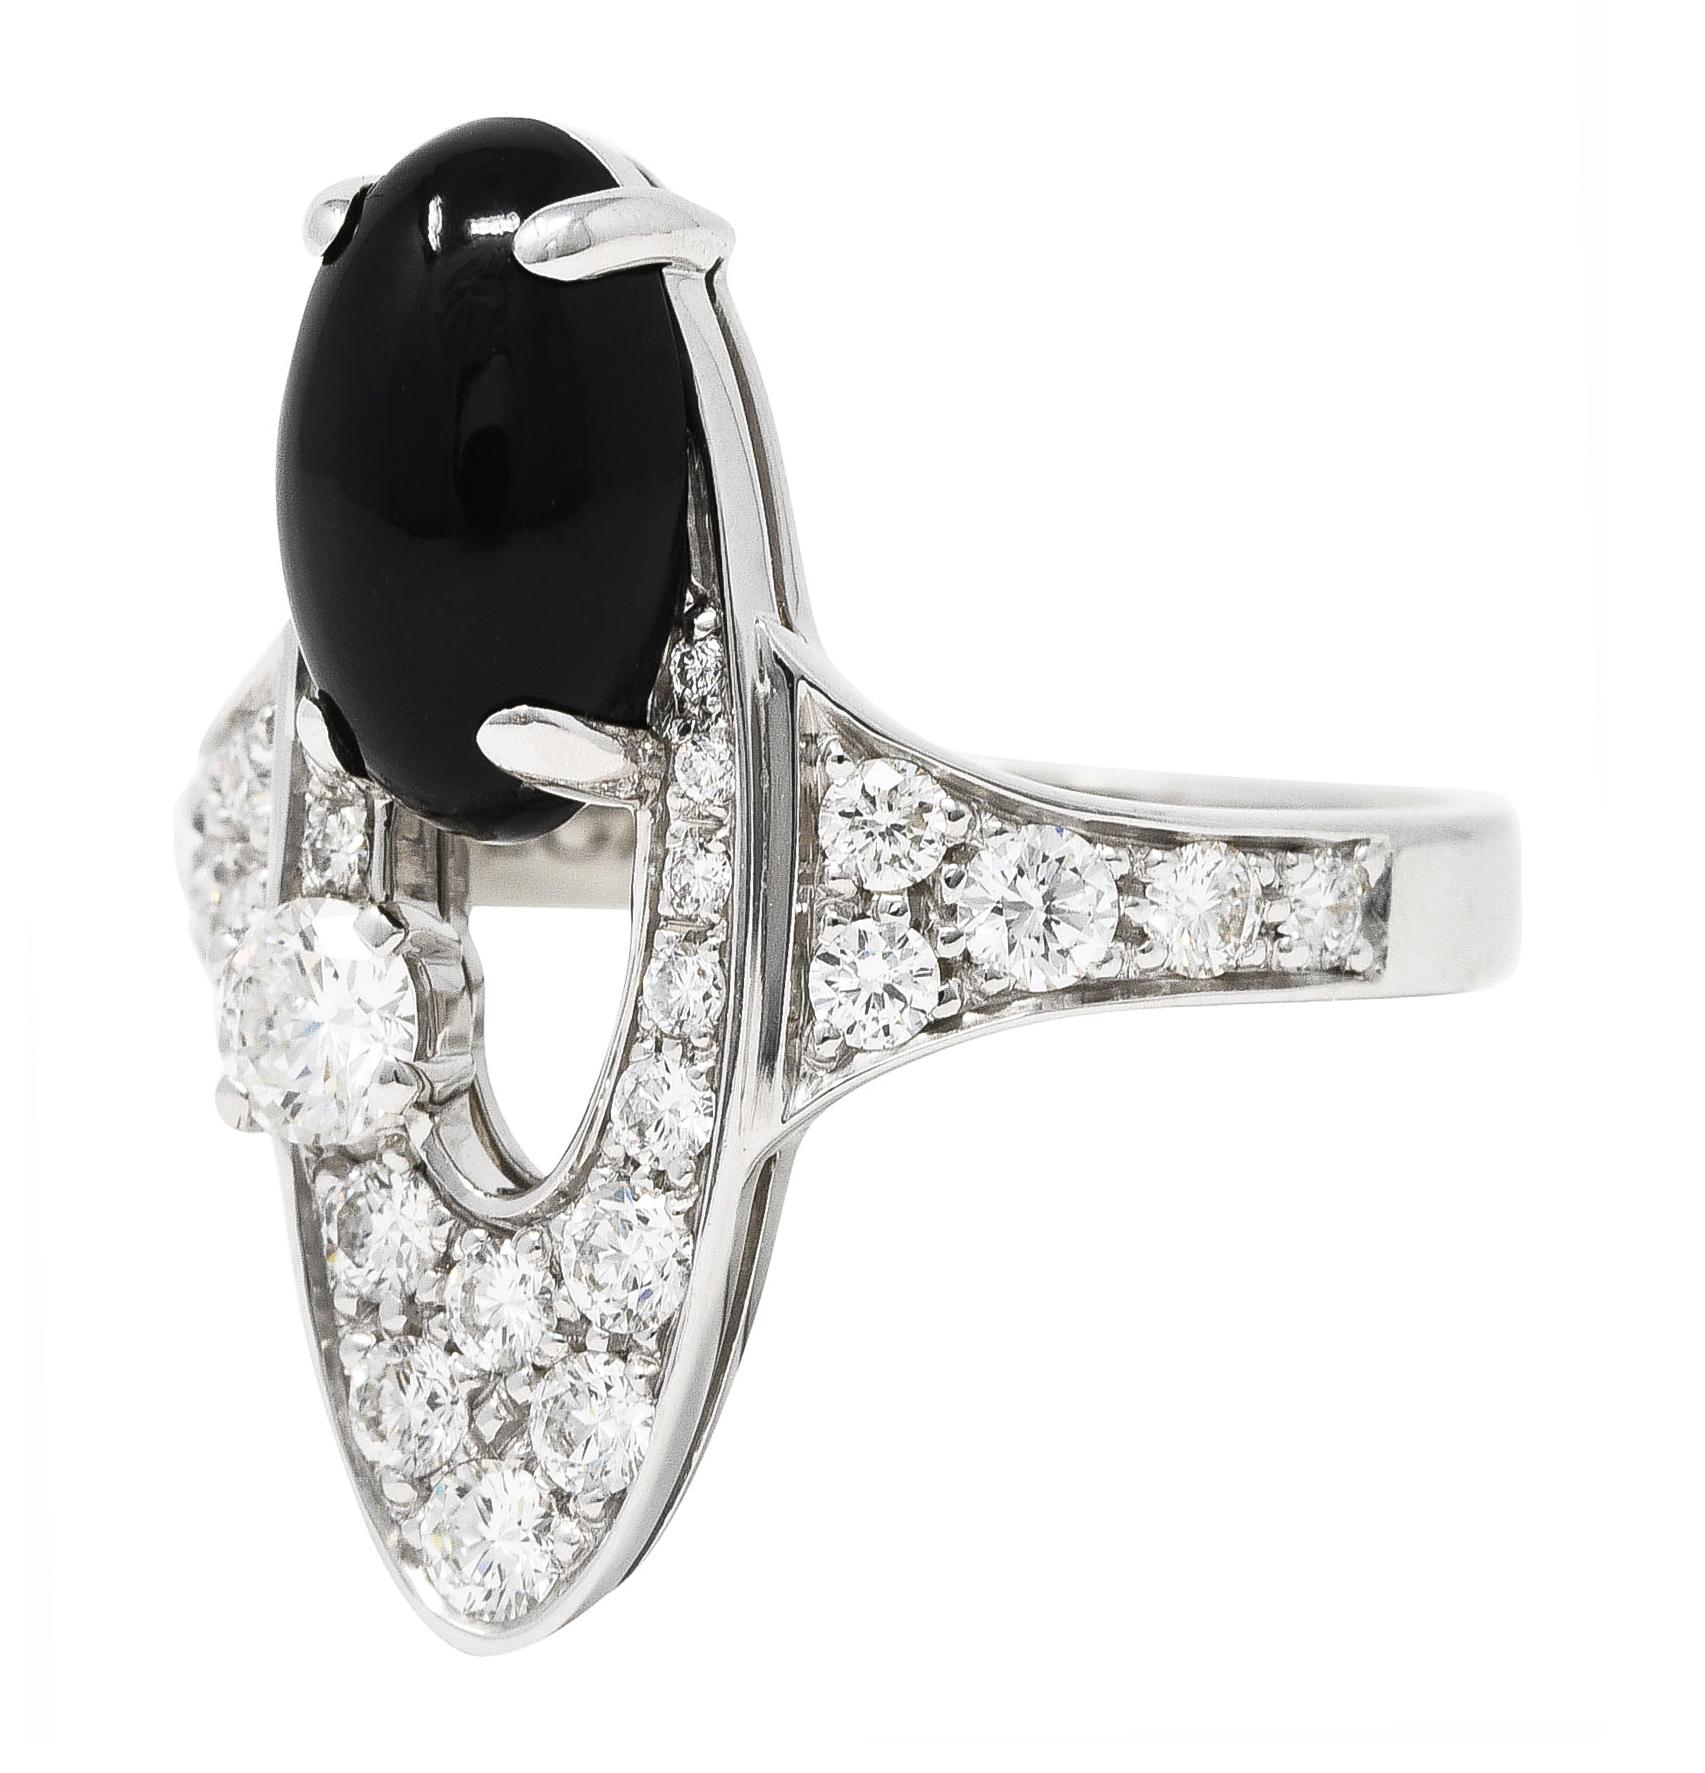 Ring is designed as an elongated ellipse shape with an open center

Featuring an oval onyx cabochon measuring approximately 11.0 x 6.0 mm

Opaque black with very good polish

Paired with a round brilliant cut diamond weighing approximately 0.18